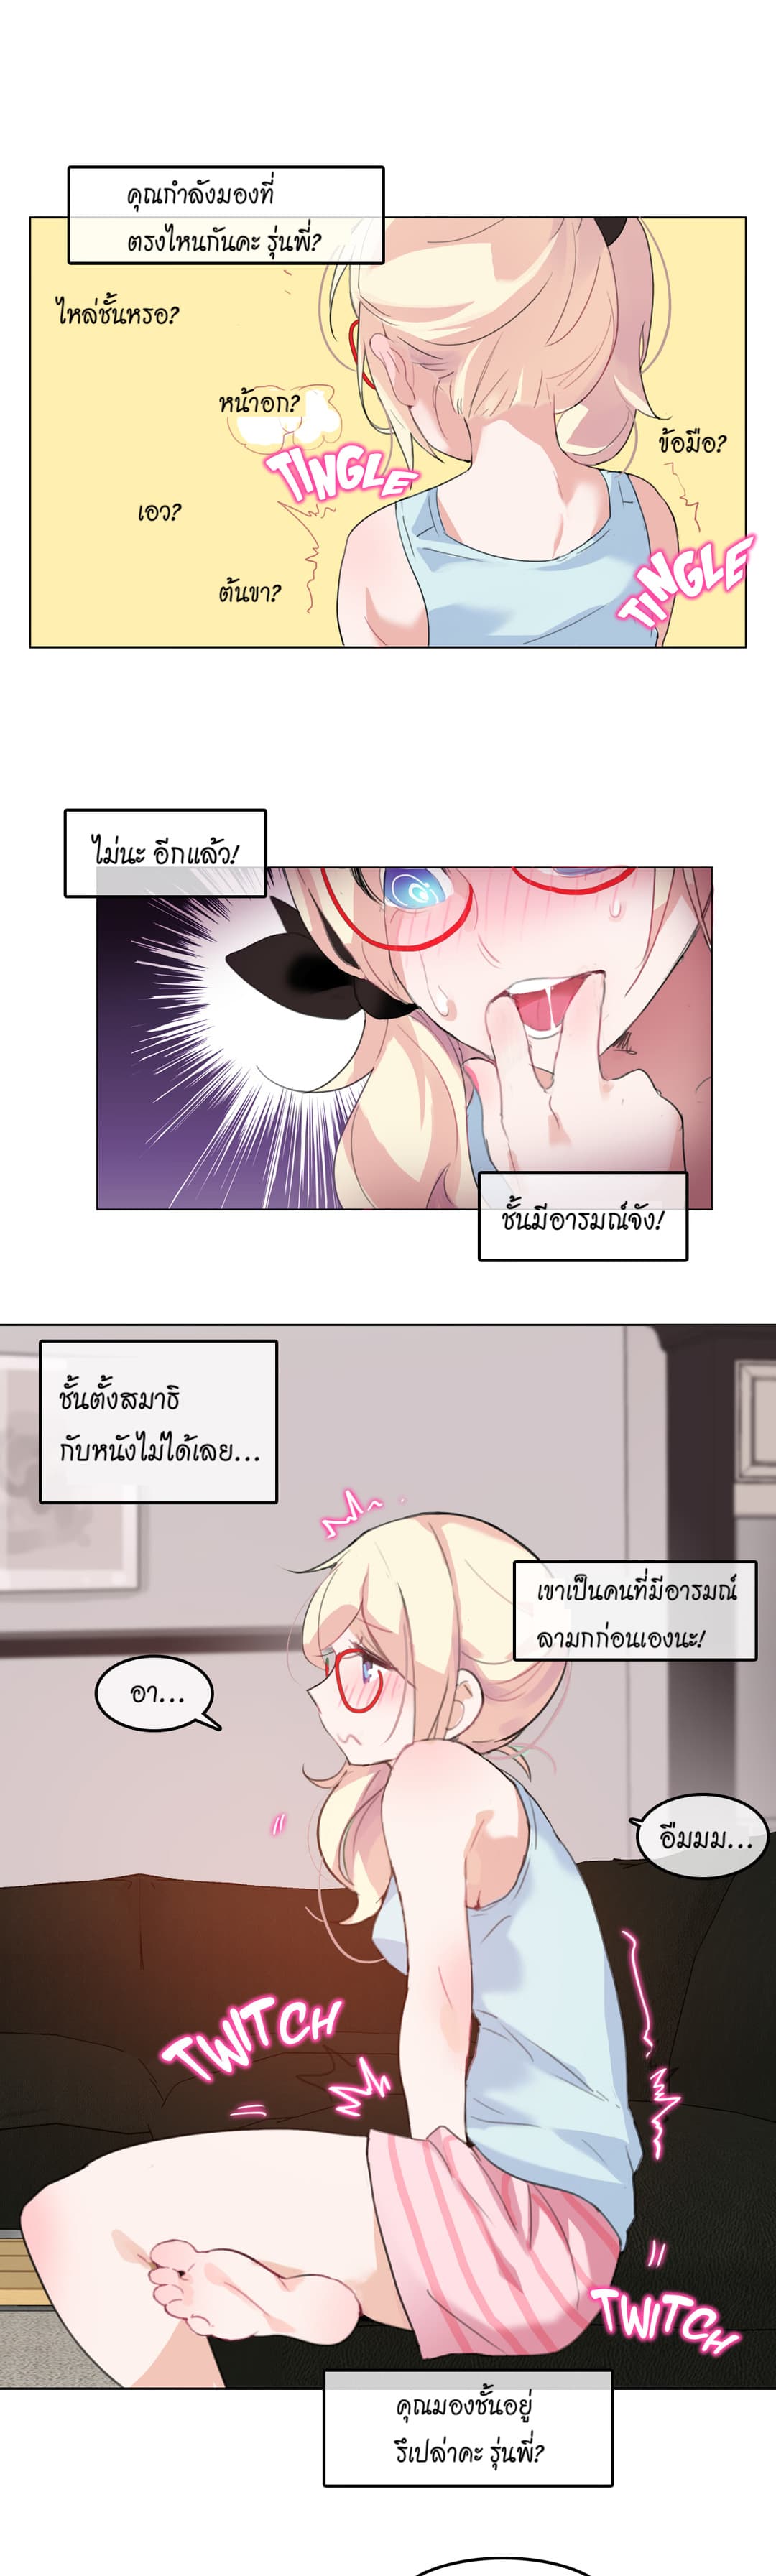 A Pervert’s Daily Life 4 (19)